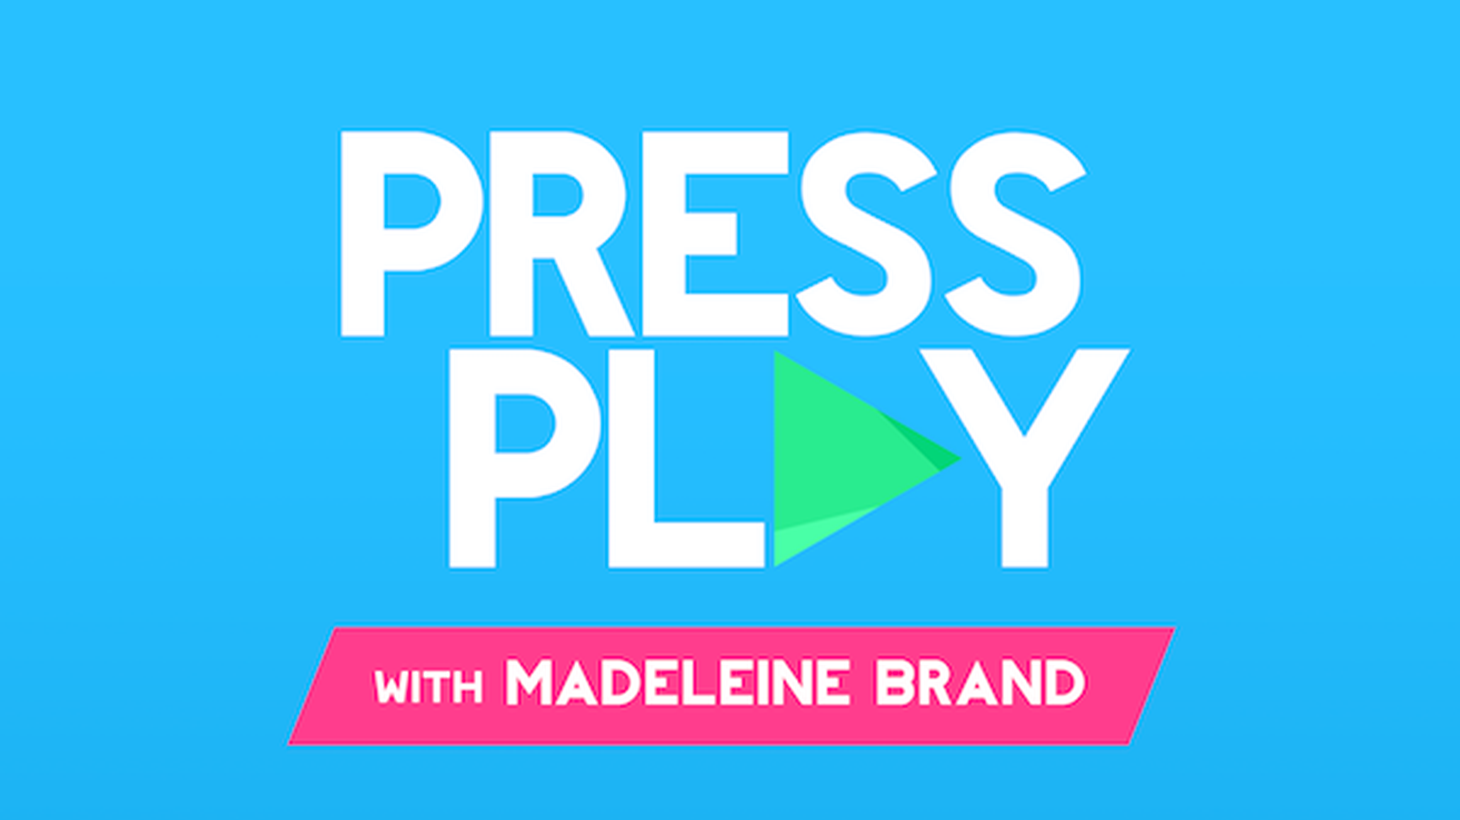 Today on Press Play, we listen back to some of our favorite 2014 interviews with comedians.